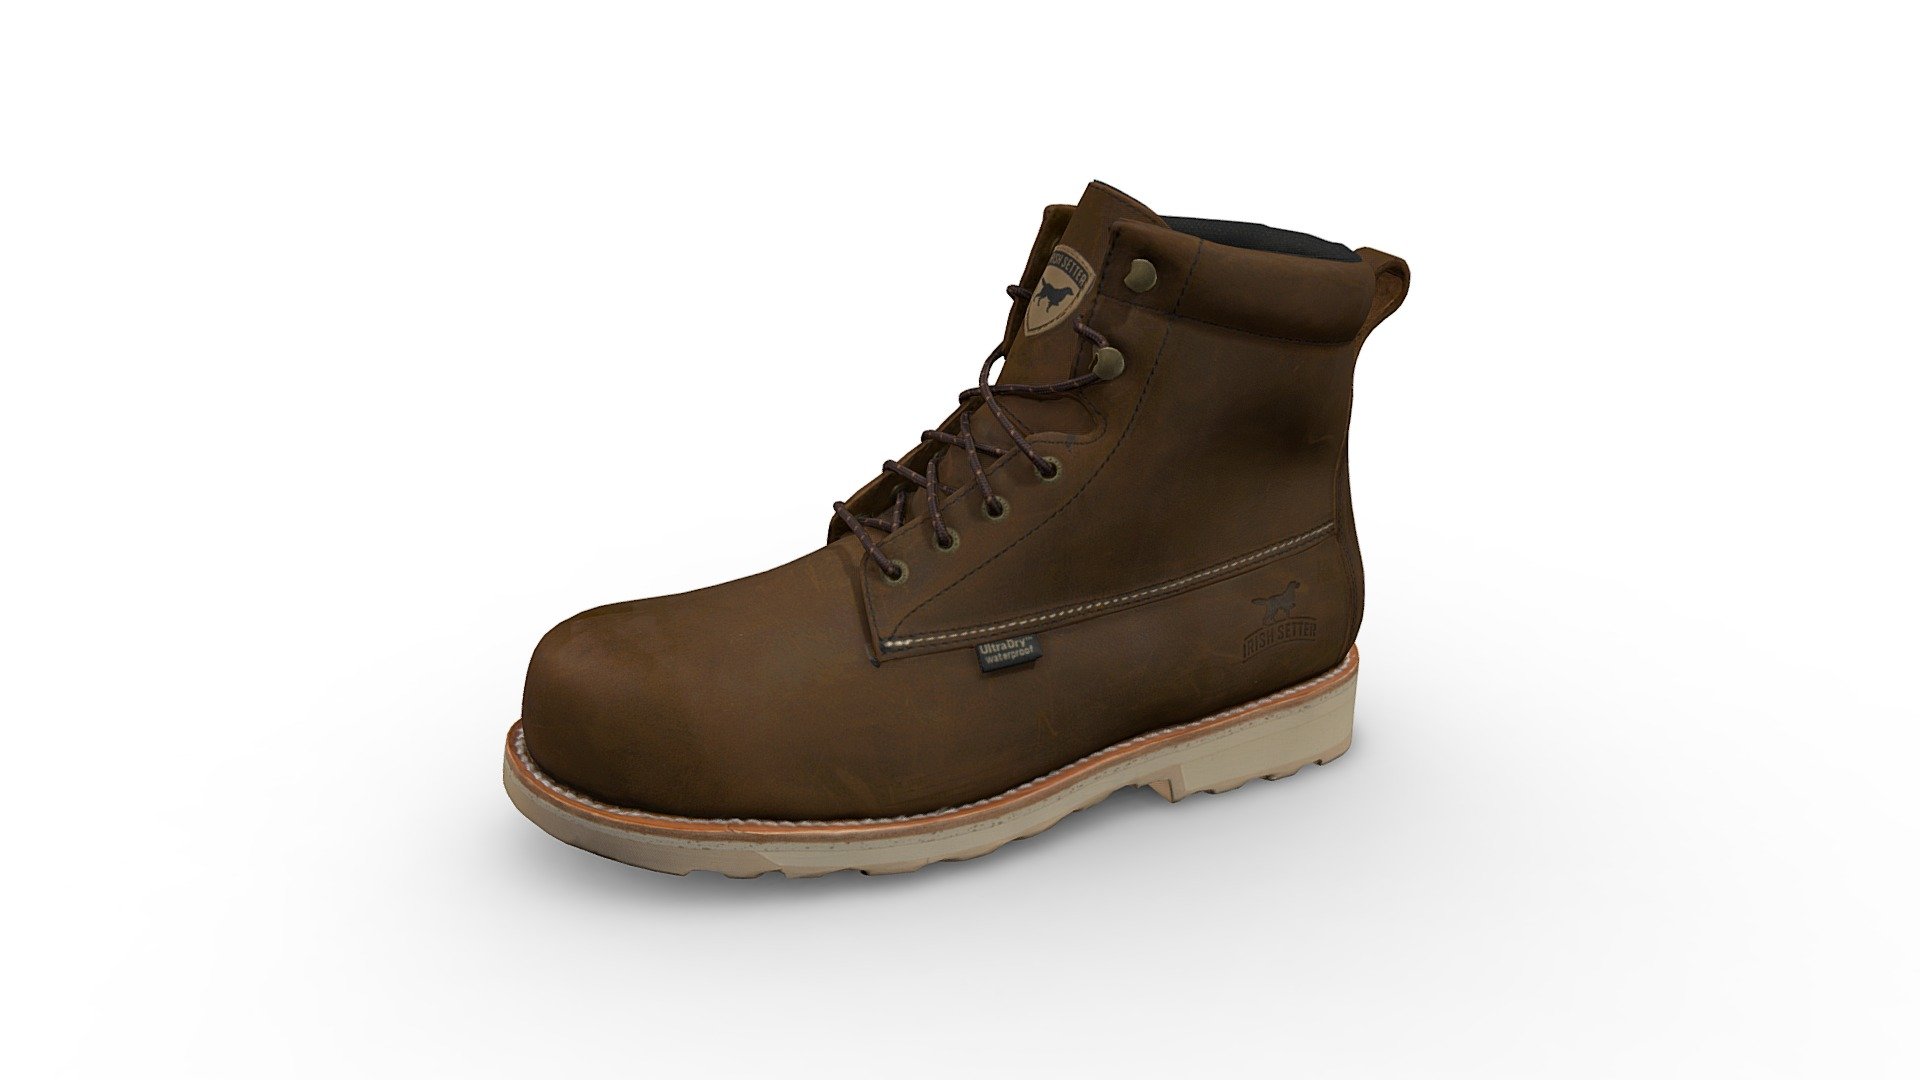 3D scan of an Irish Setter by Red Wing Leather Boot

Wingshooter ST boots deliver superior comfort and support on the job. The iconic amber leather and white sole combine to create the distinctive Irish Setter look. A lightweight safety toe cap ensures roomy protection. UltraDry™ waterproofing keeps your feet dry, and the wedge sole offers best-in-class slip resistance 3d model